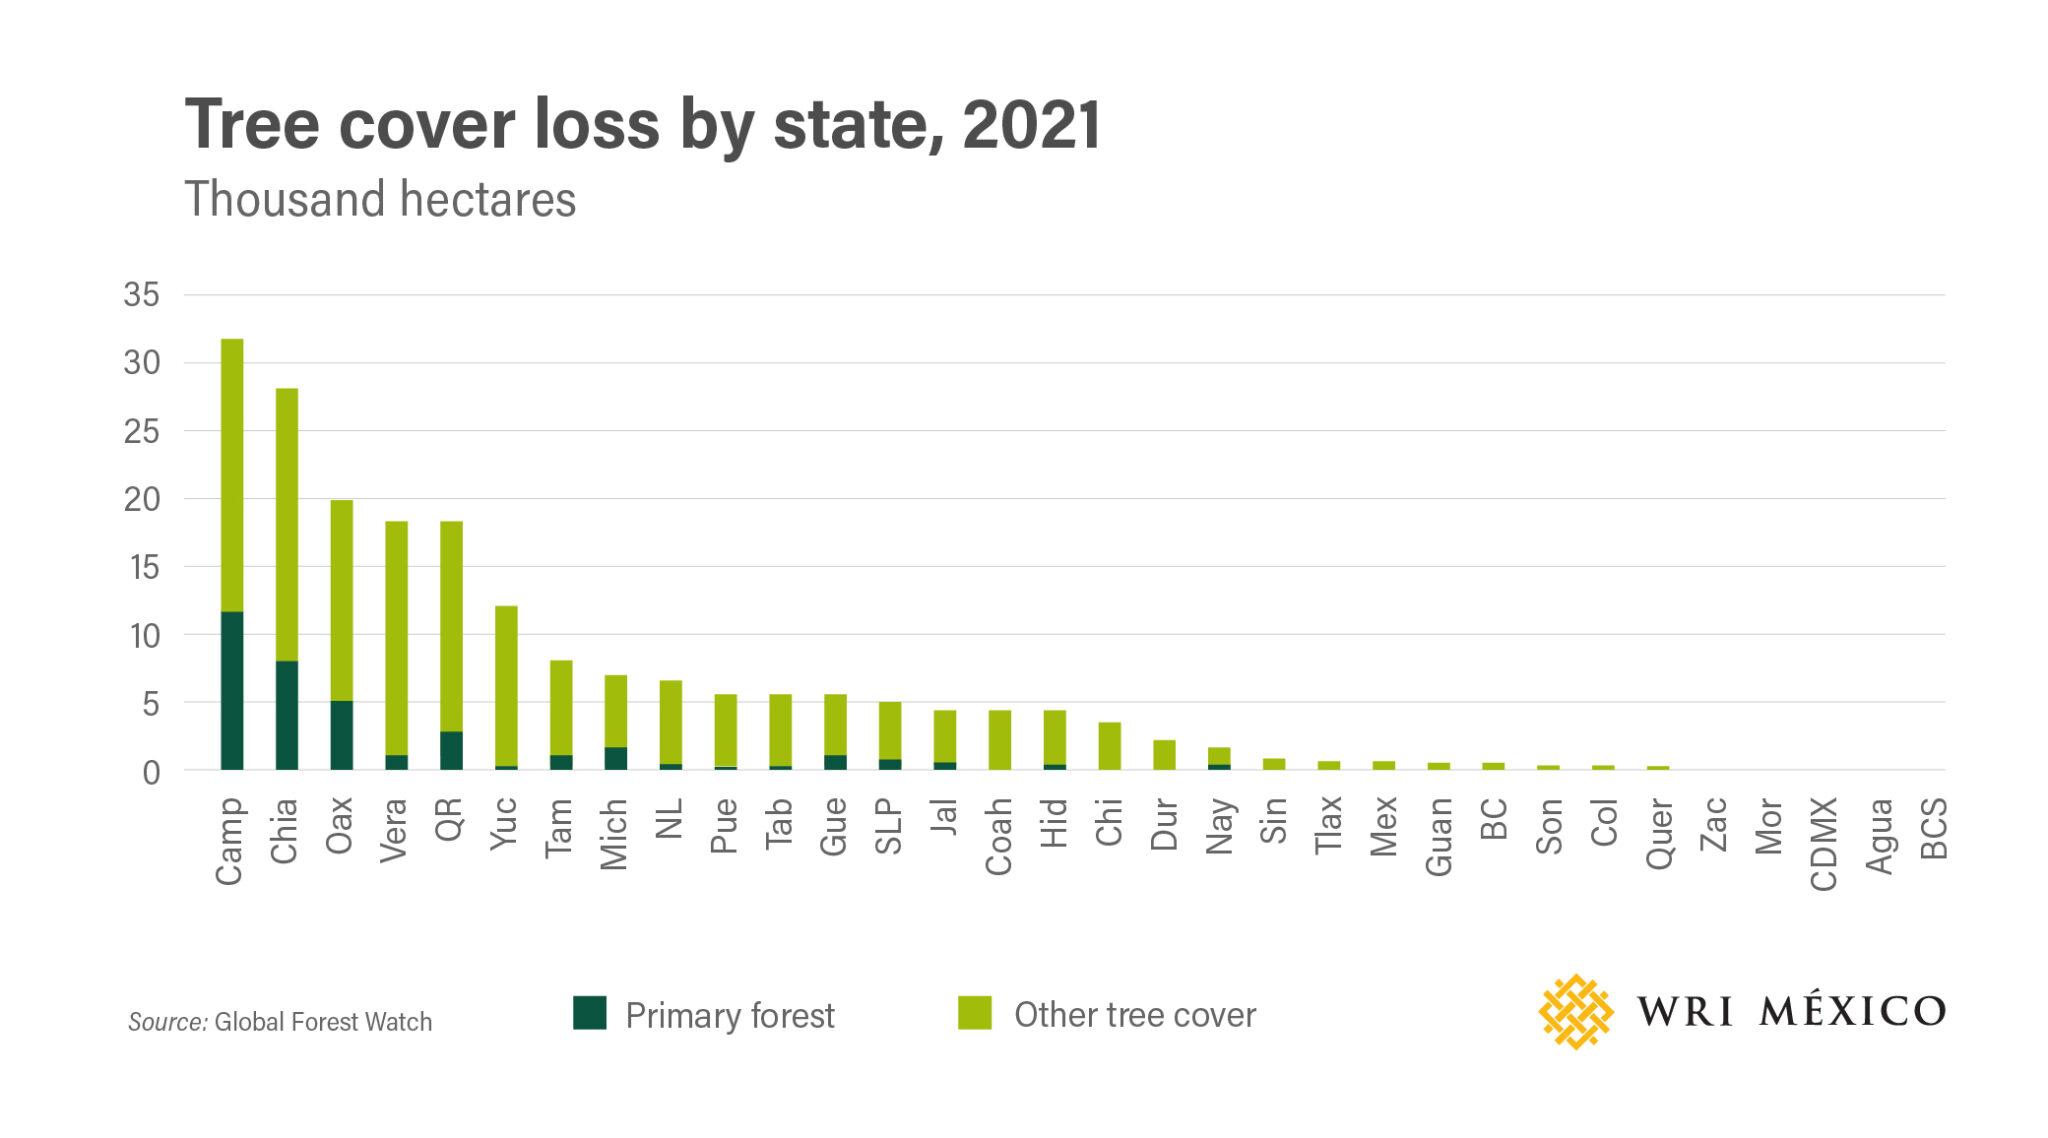 Graph of tree cover loss by state in Mexico, 2021